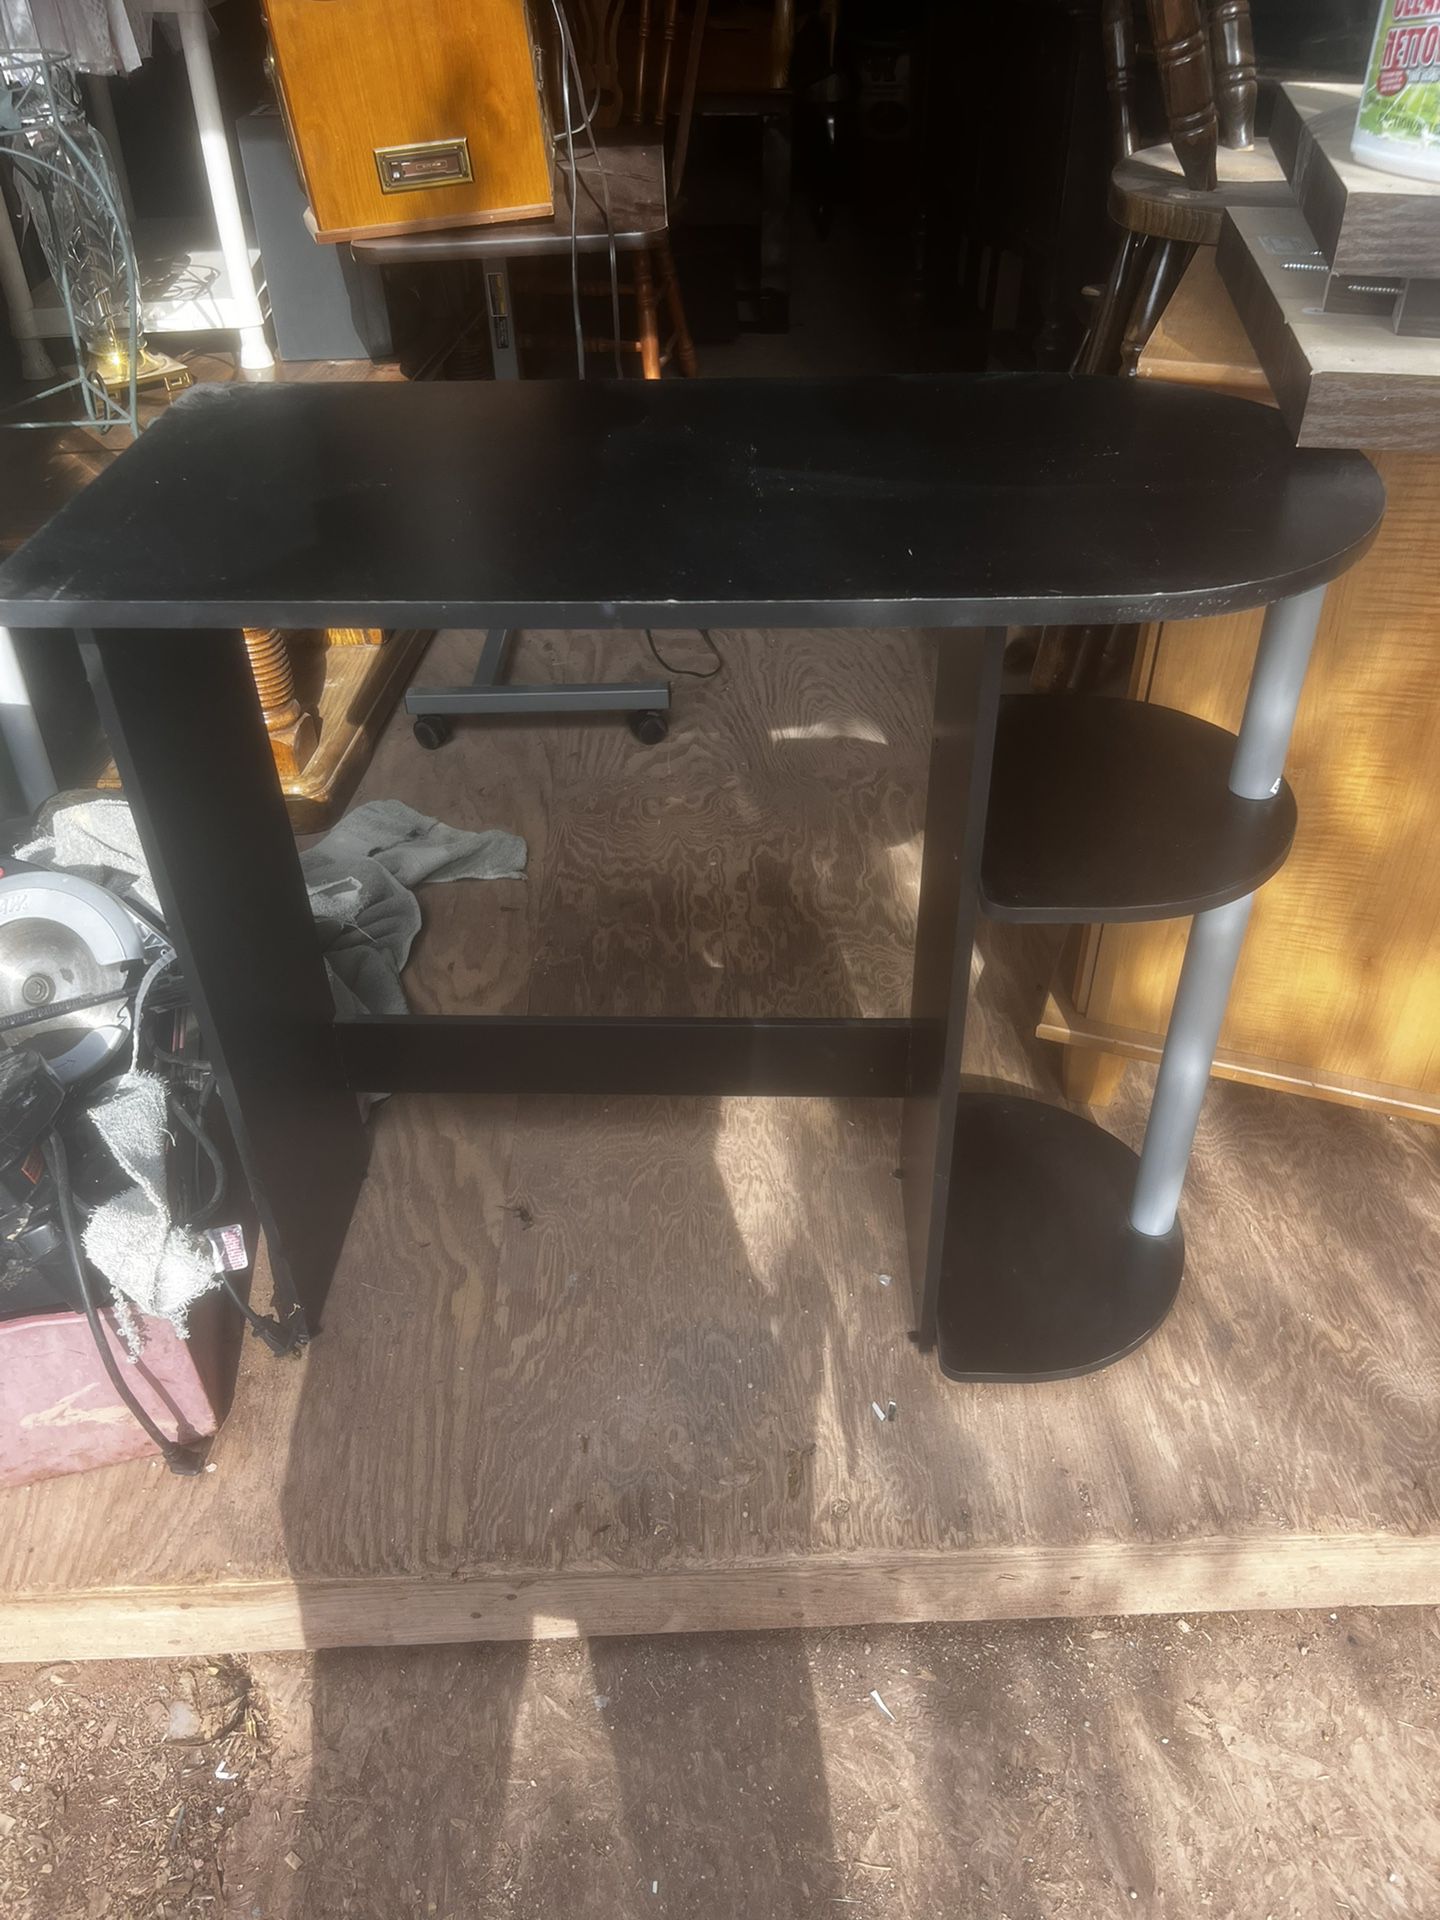 A nice Little Desk/table Its 28 Imches Tall 36 Inches Wide And 15 Inchex Deep